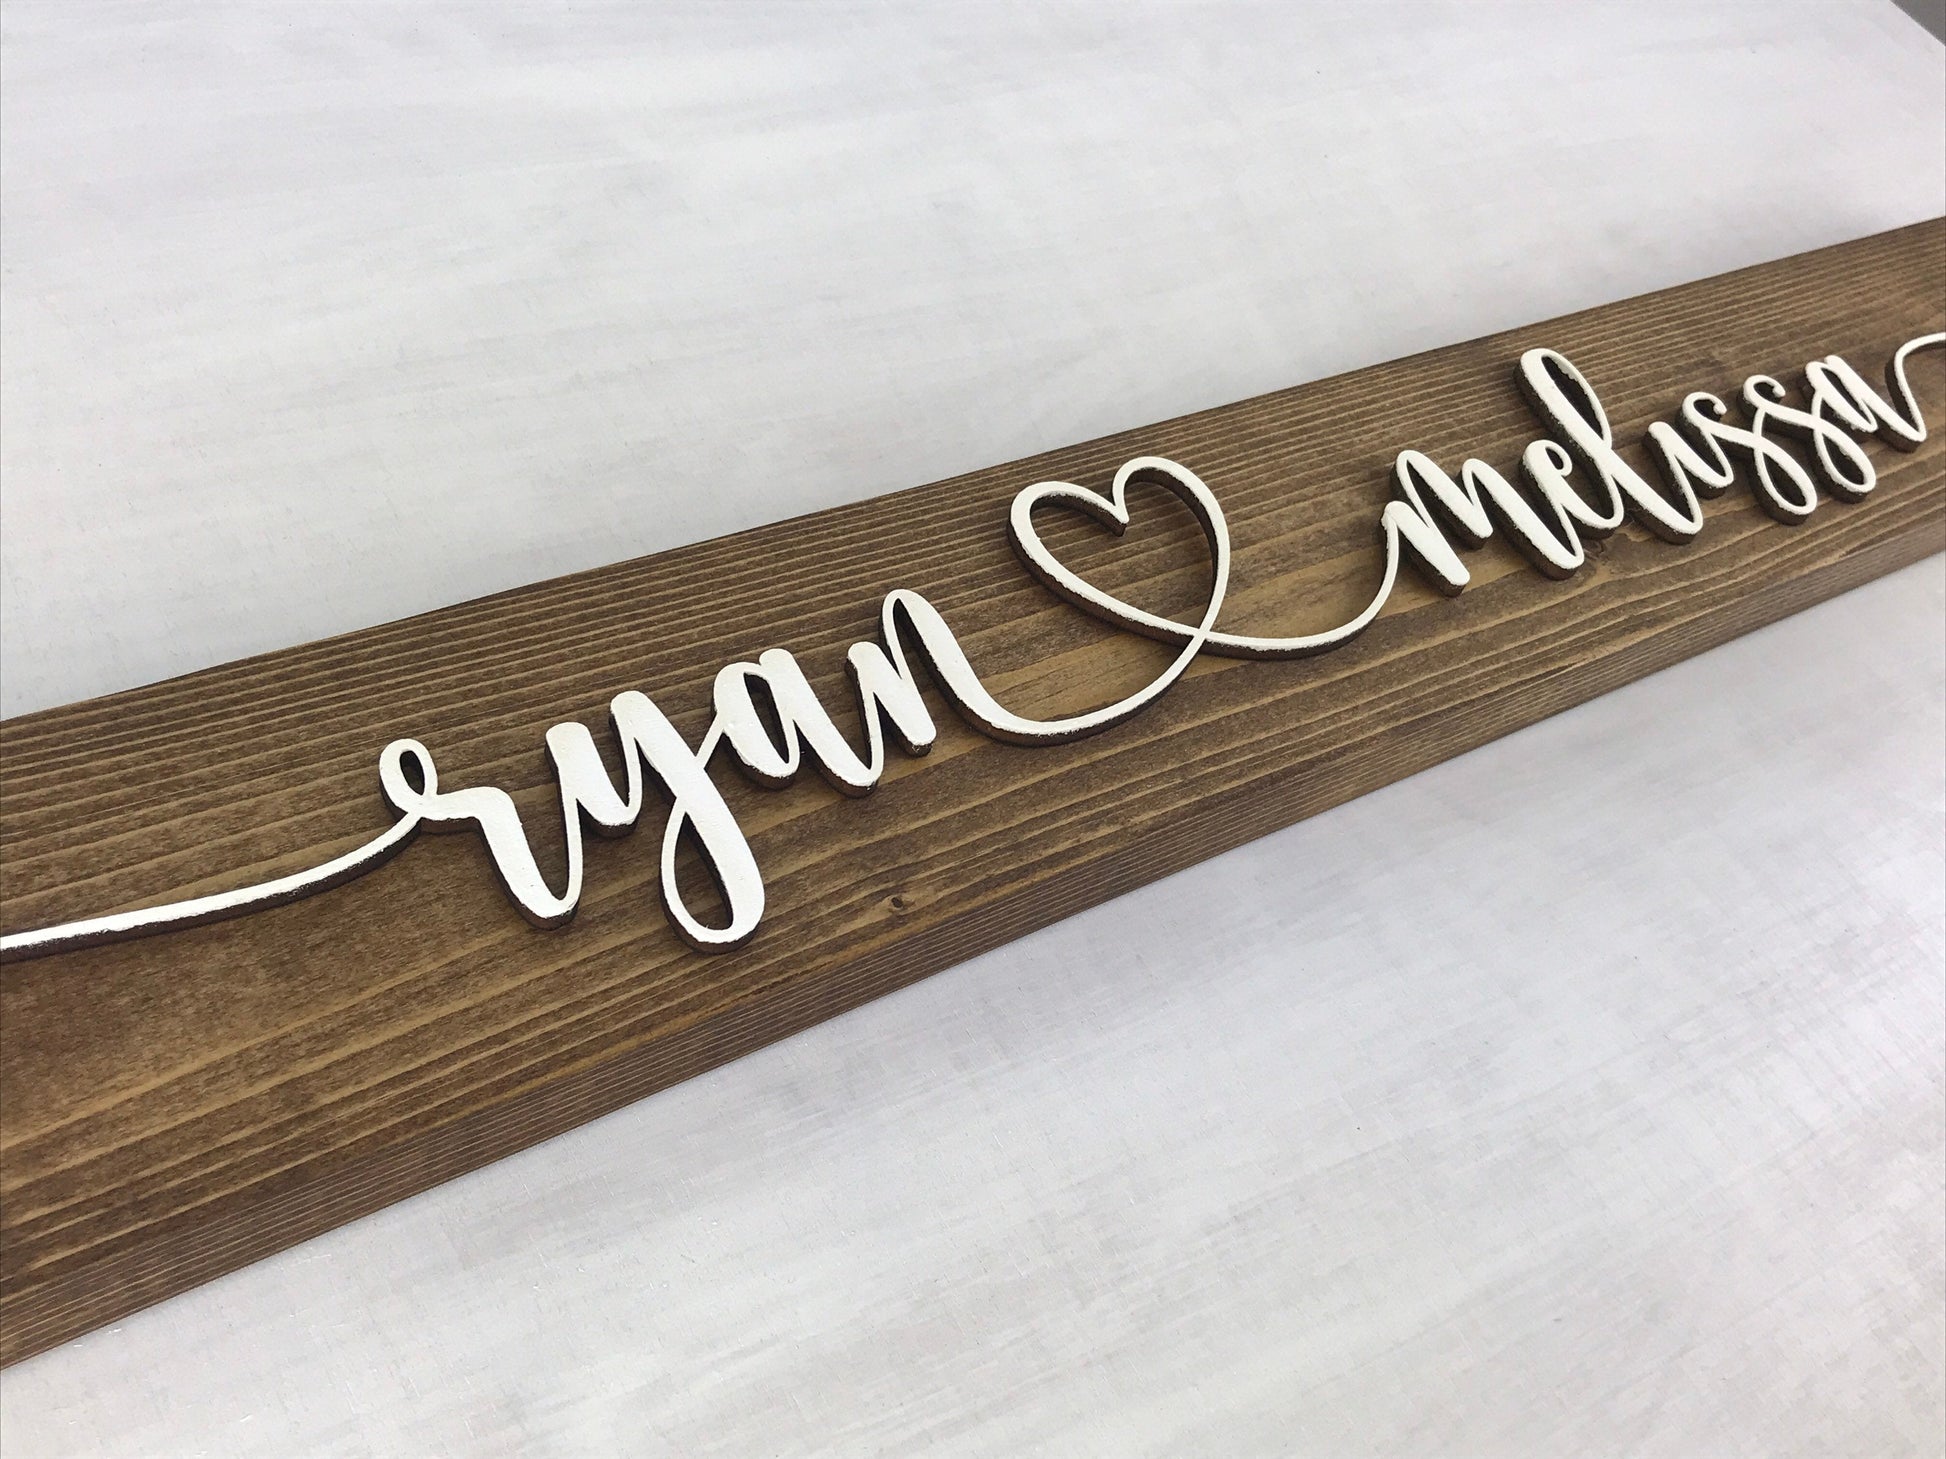 engagement party gift - personalized name sign